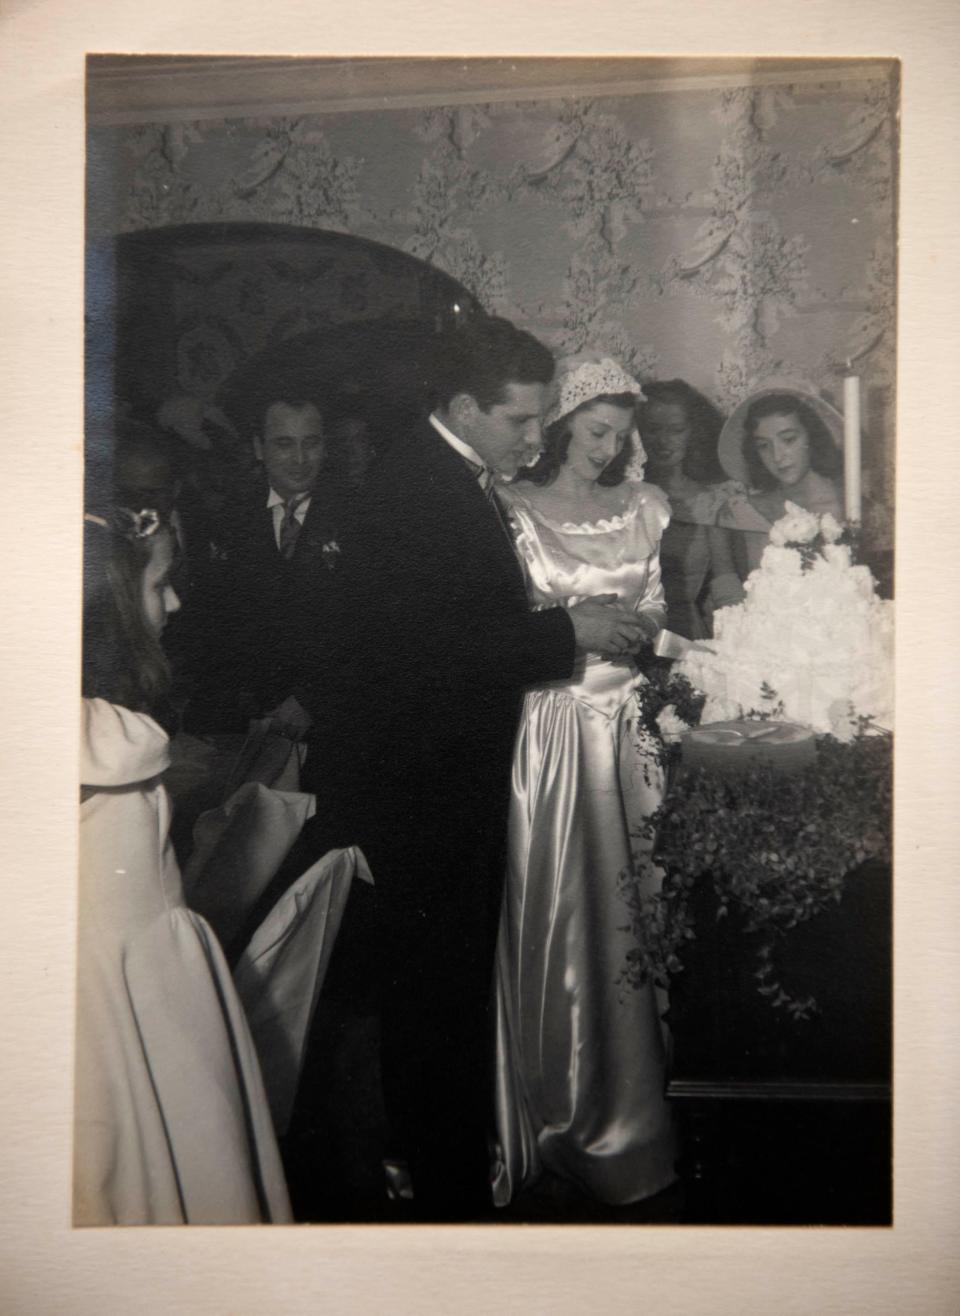 Married in November 1947, Blanche and Ralph Del Deo would go on to have four children, nine grandchildren, 17 great-grandchildren and two great-great grandchildren.